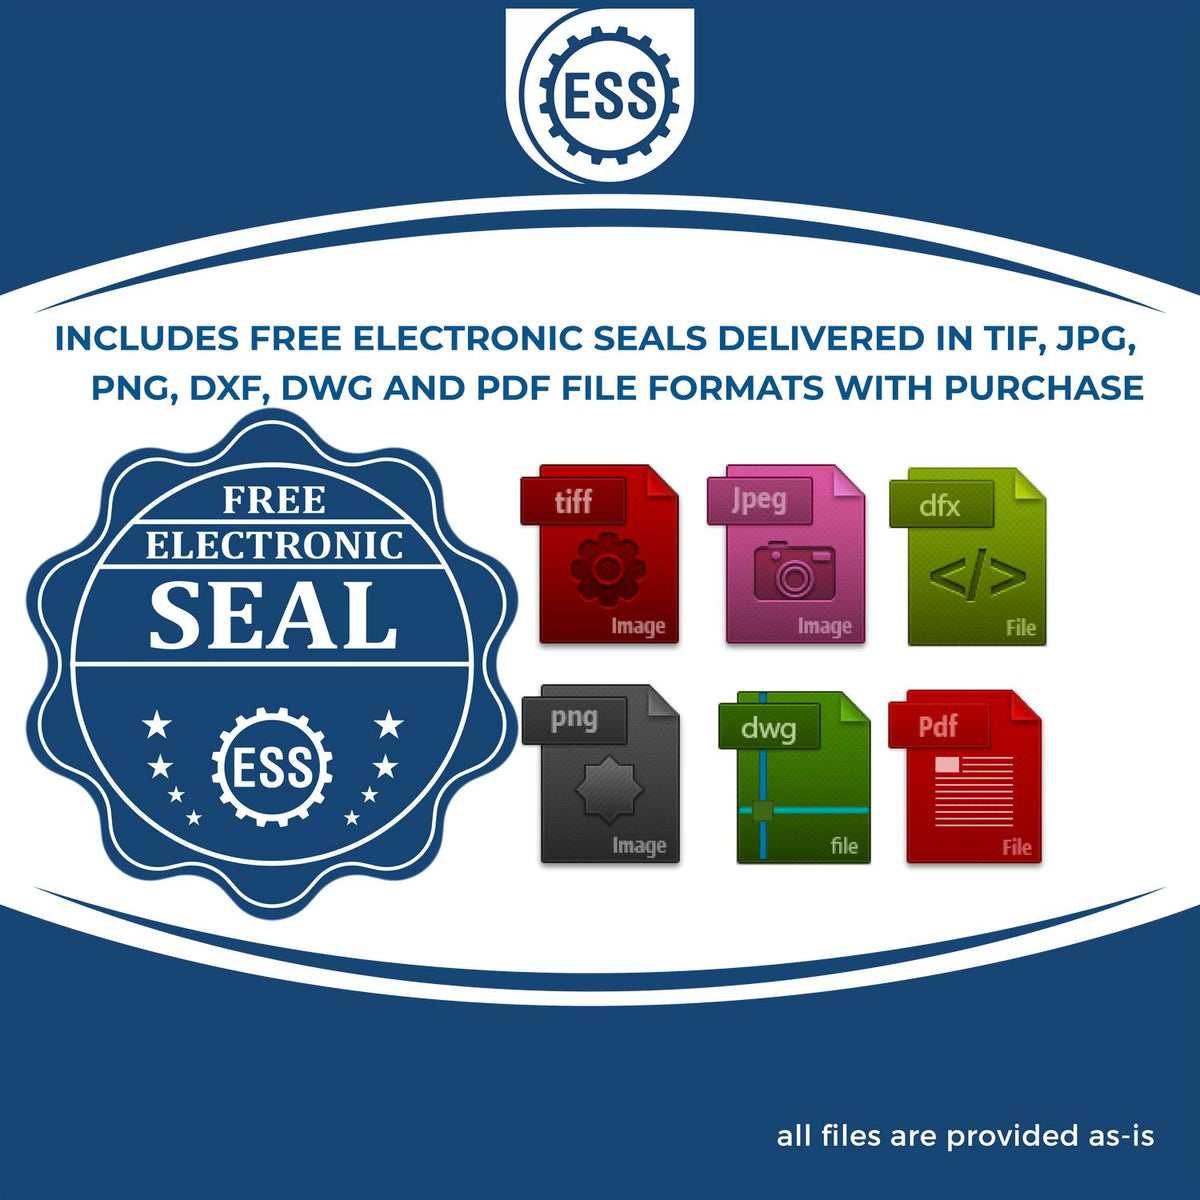 An infographic for the free electronic seal for the MaxLight Premium Pre-Inked Alabama State Seal Notarial Stamp illustrating the different file type icons such as DXF, DWG, TIF, JPG and PNG.